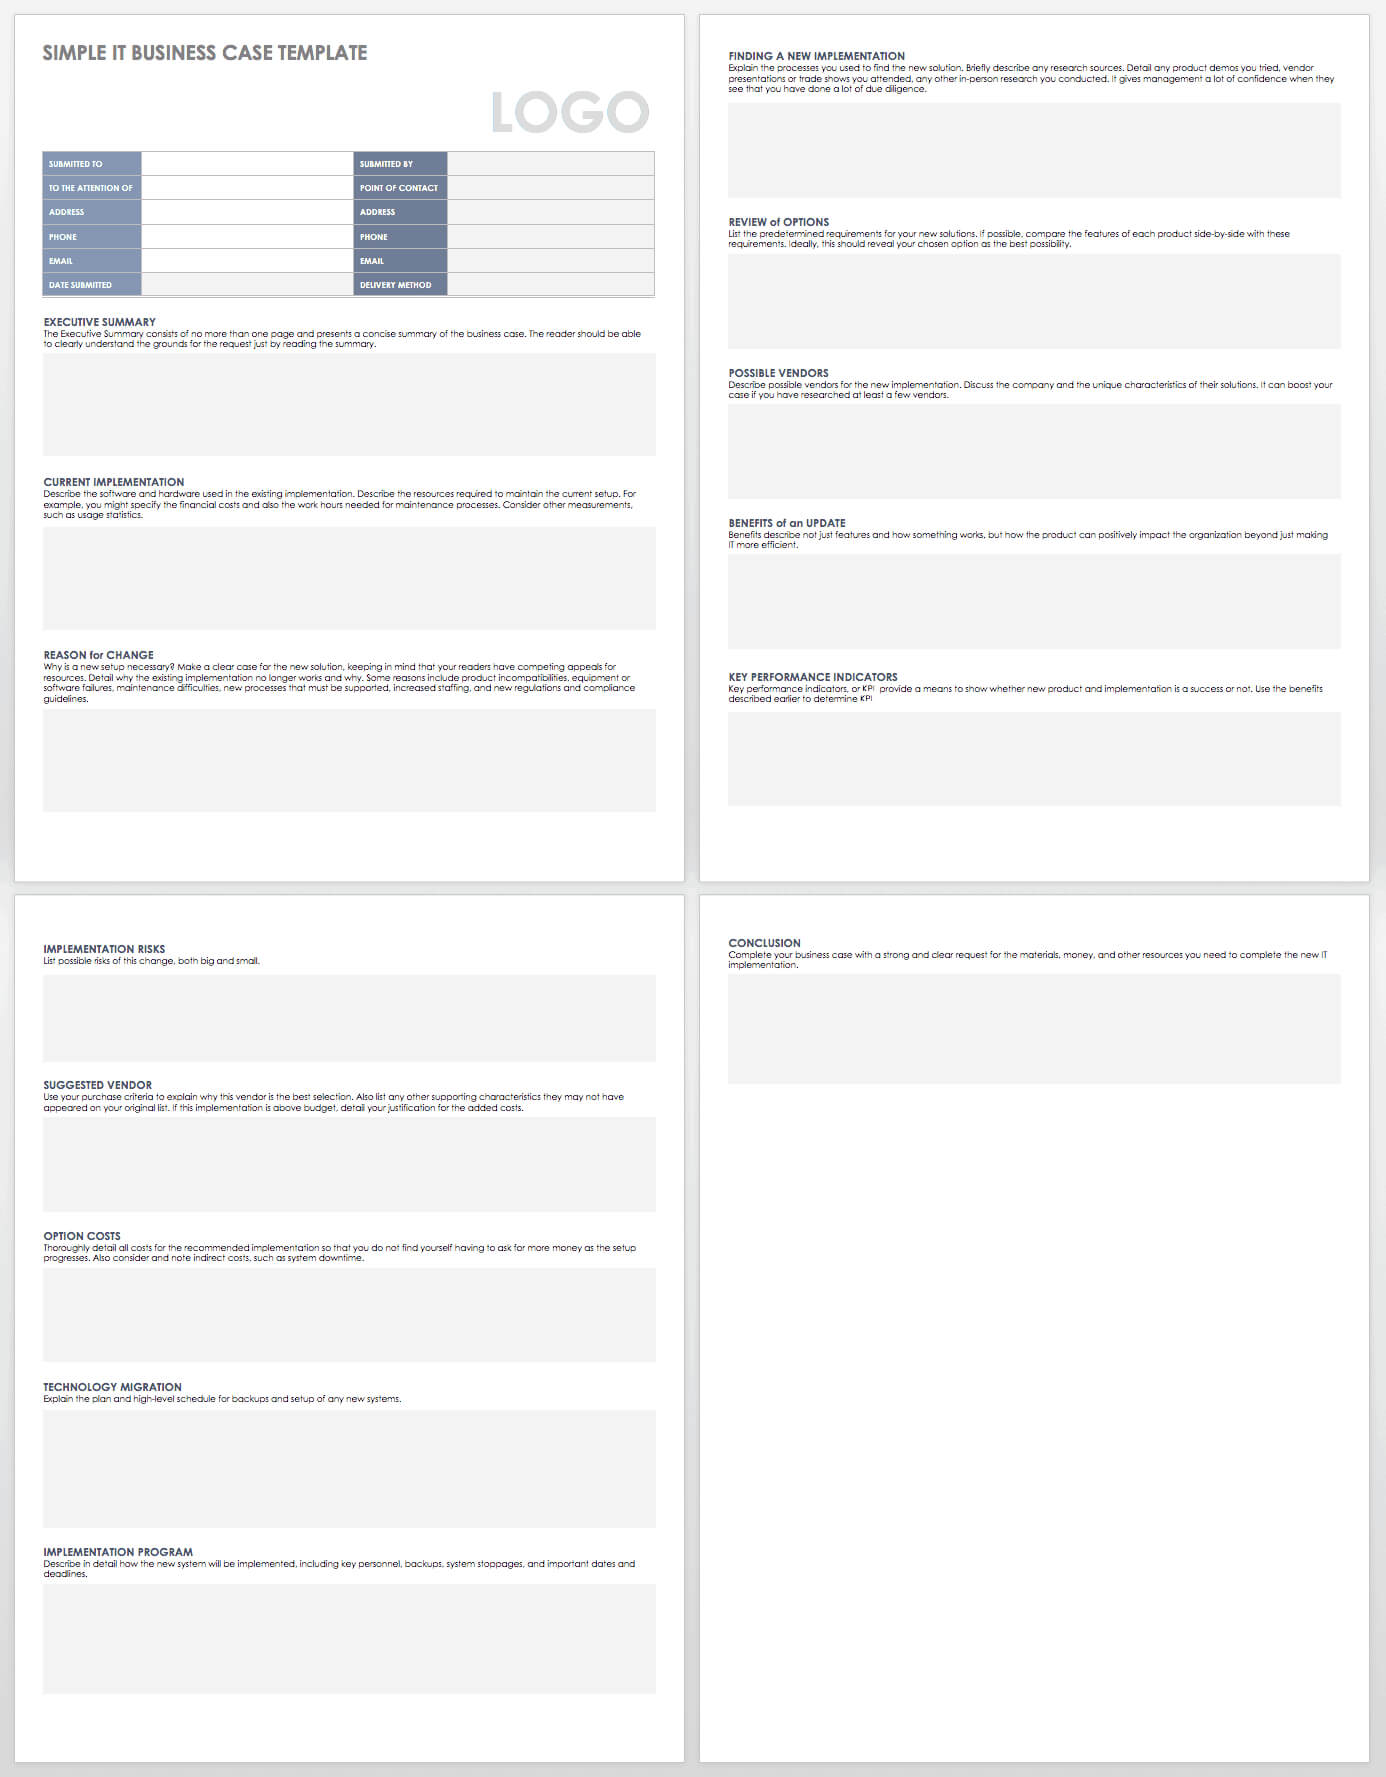 Free Business Case Templates | Smartsheet Regarding Business Case One Page Template